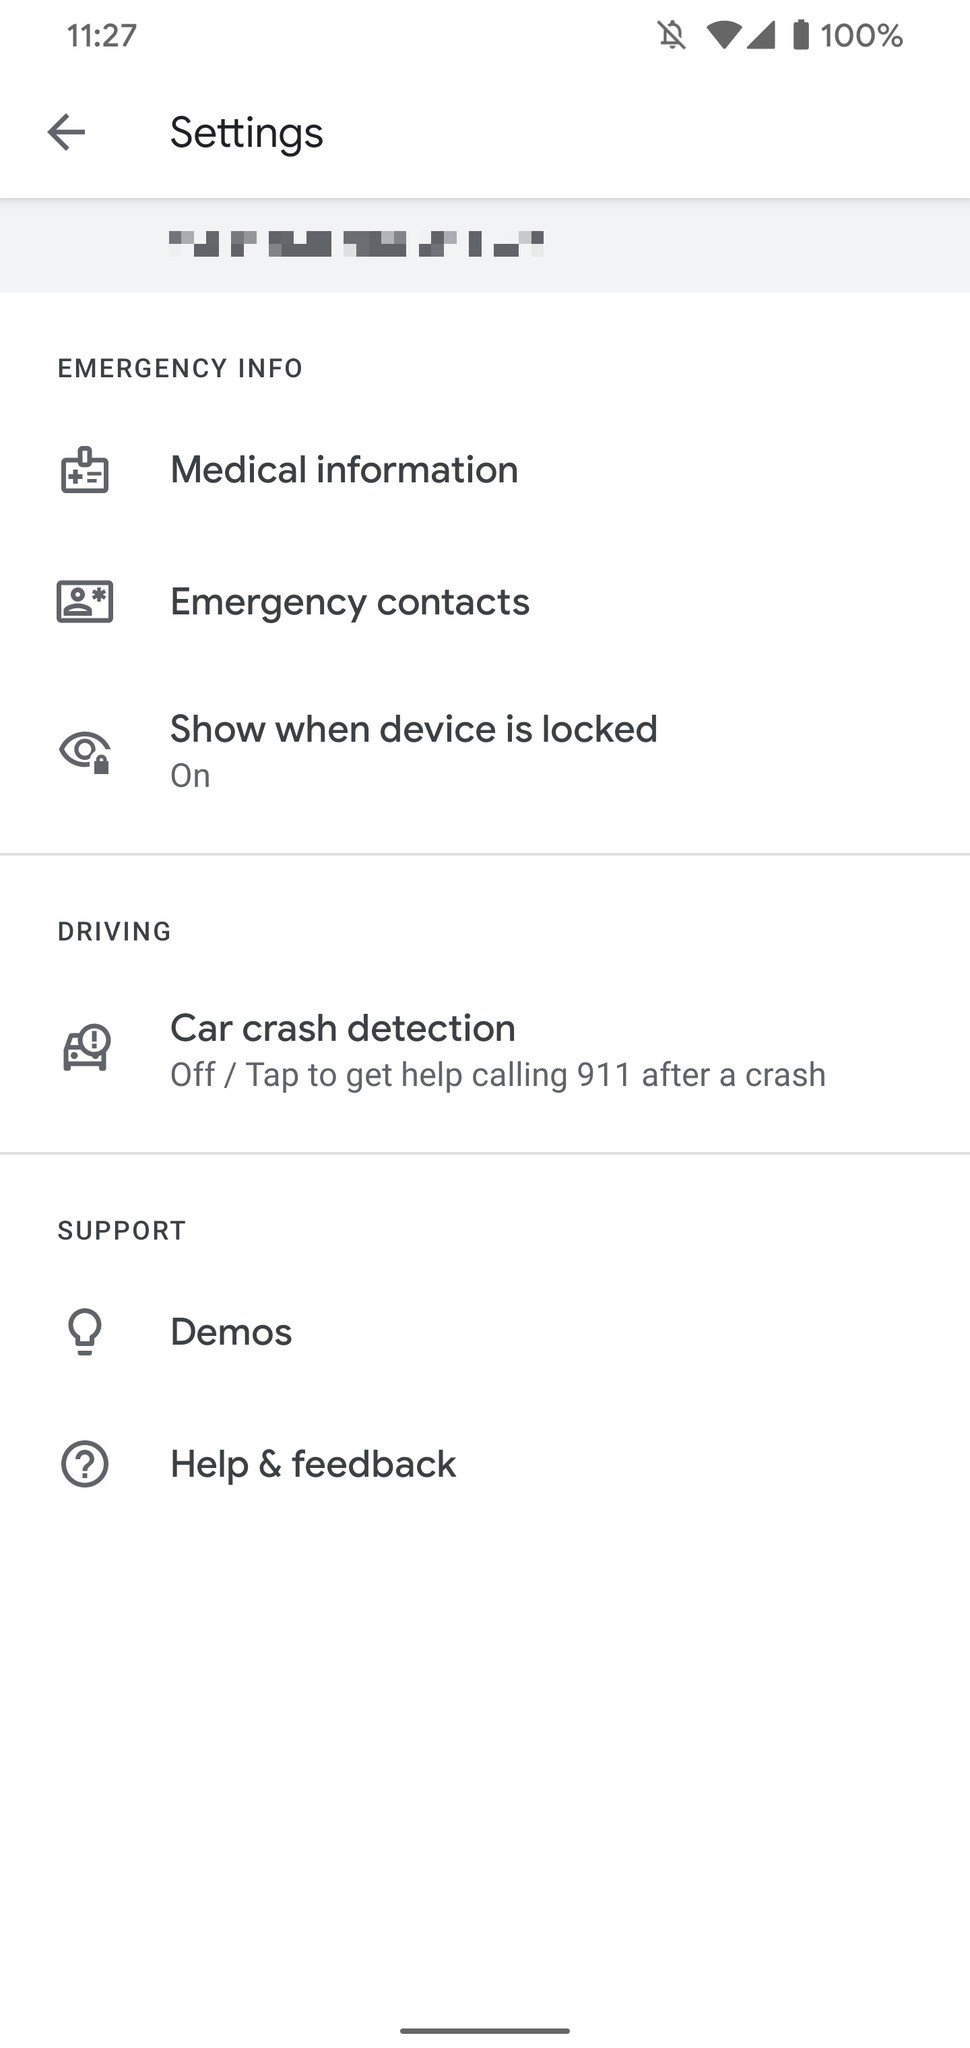 Settings for Personal Safety app